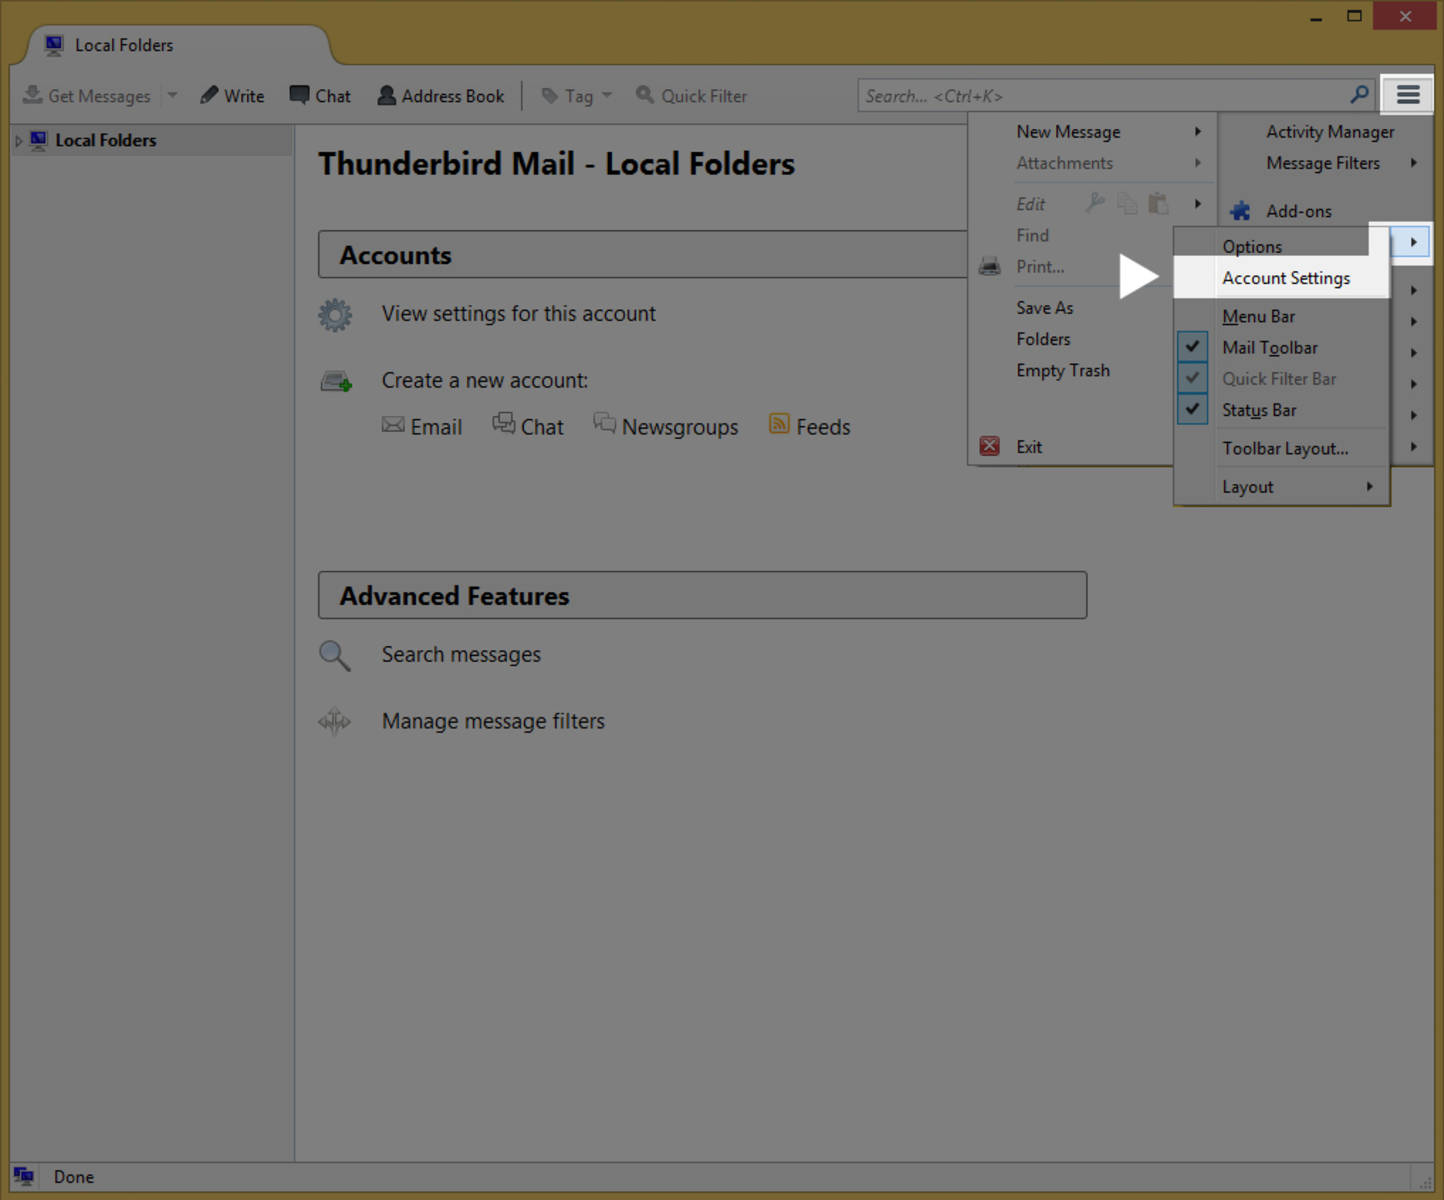 Step 1 » From the Tools menu, select Options, then choose Account Settings.